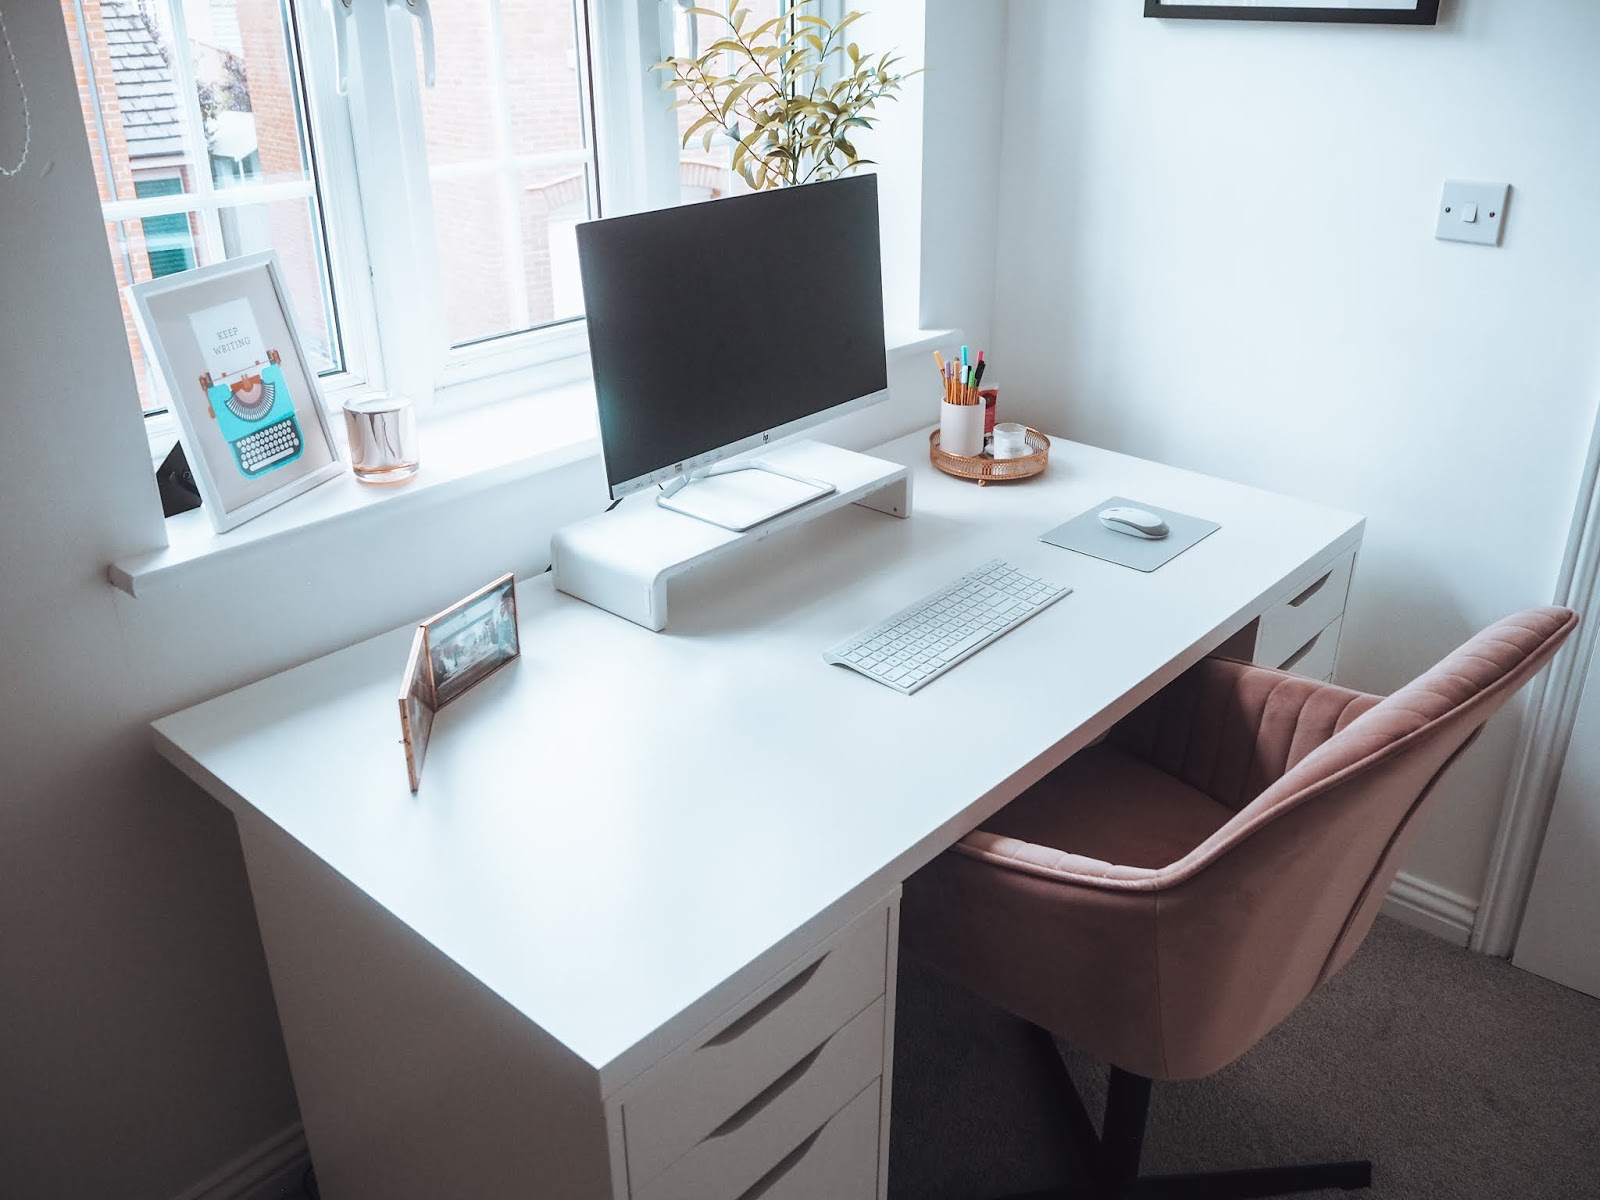 Creating an office space at home